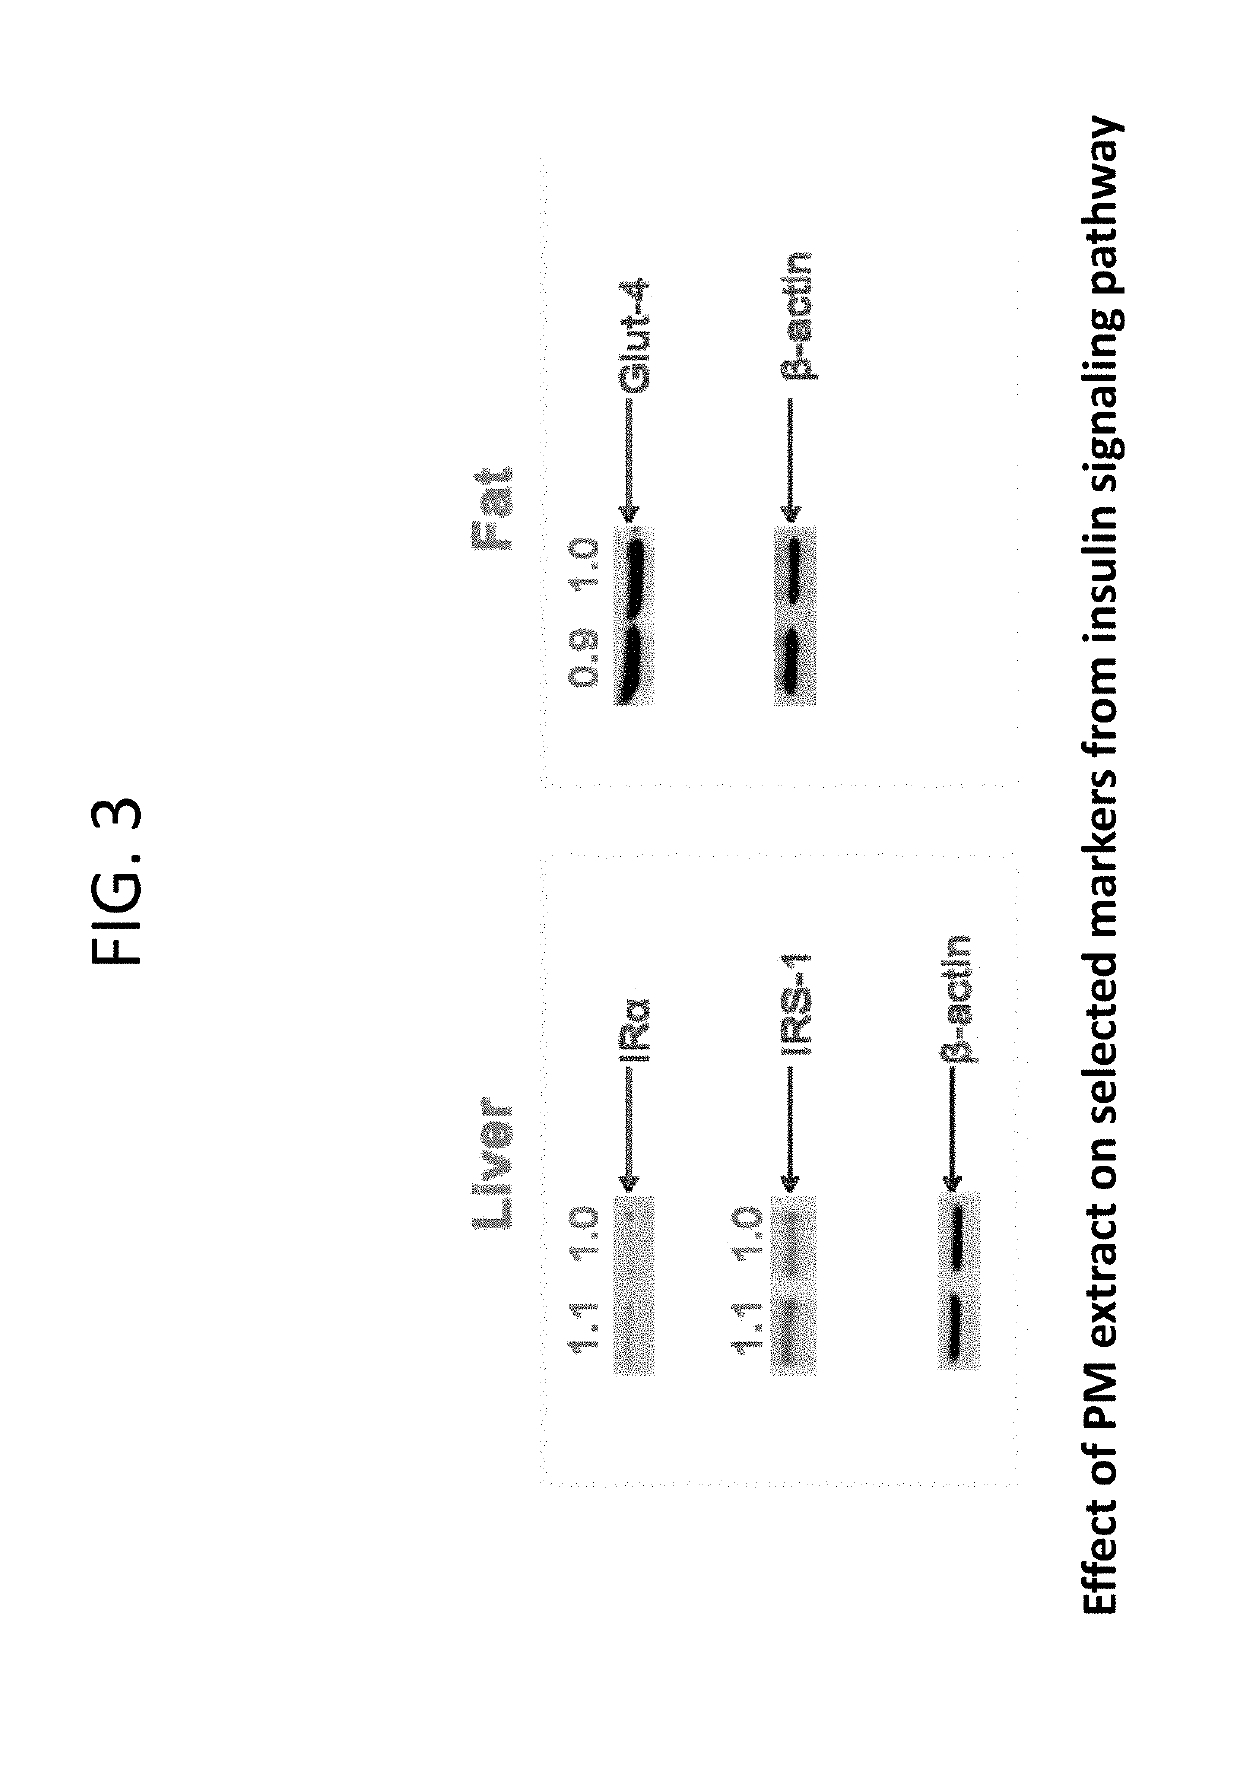 Composition containing stilbene glycoside and preparation and uses thereof for treating diabetes